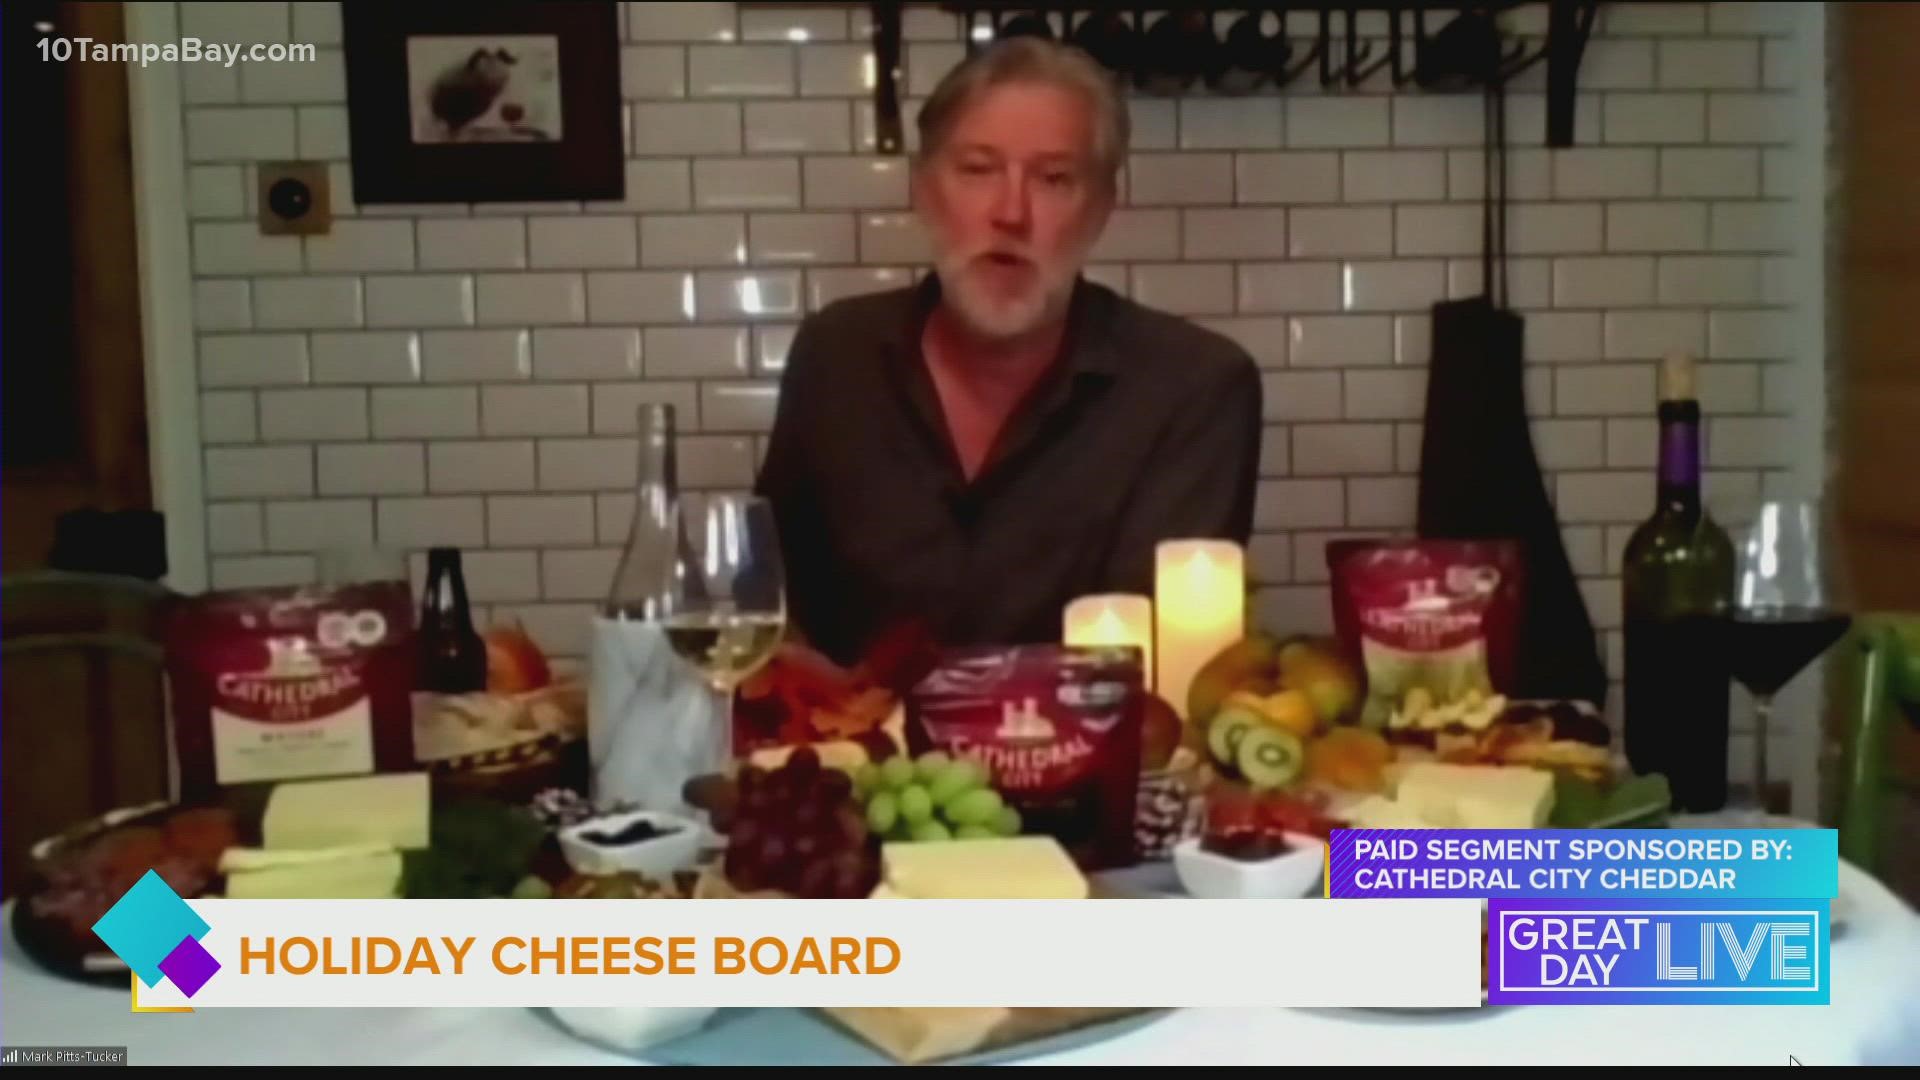 Segment sponsored by Cathedral City Cheddar Cheese.